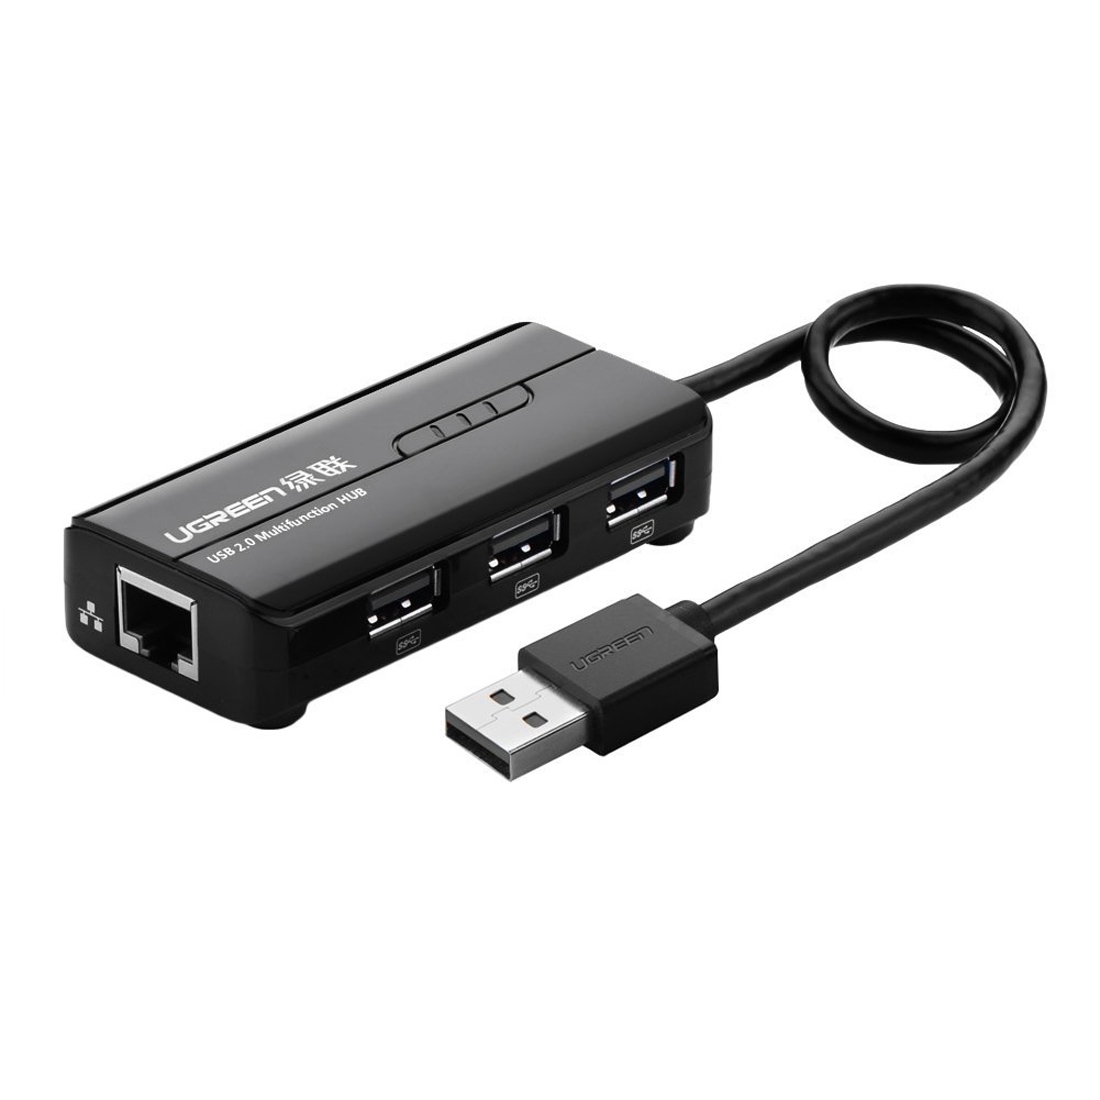 ethernet for video to mac